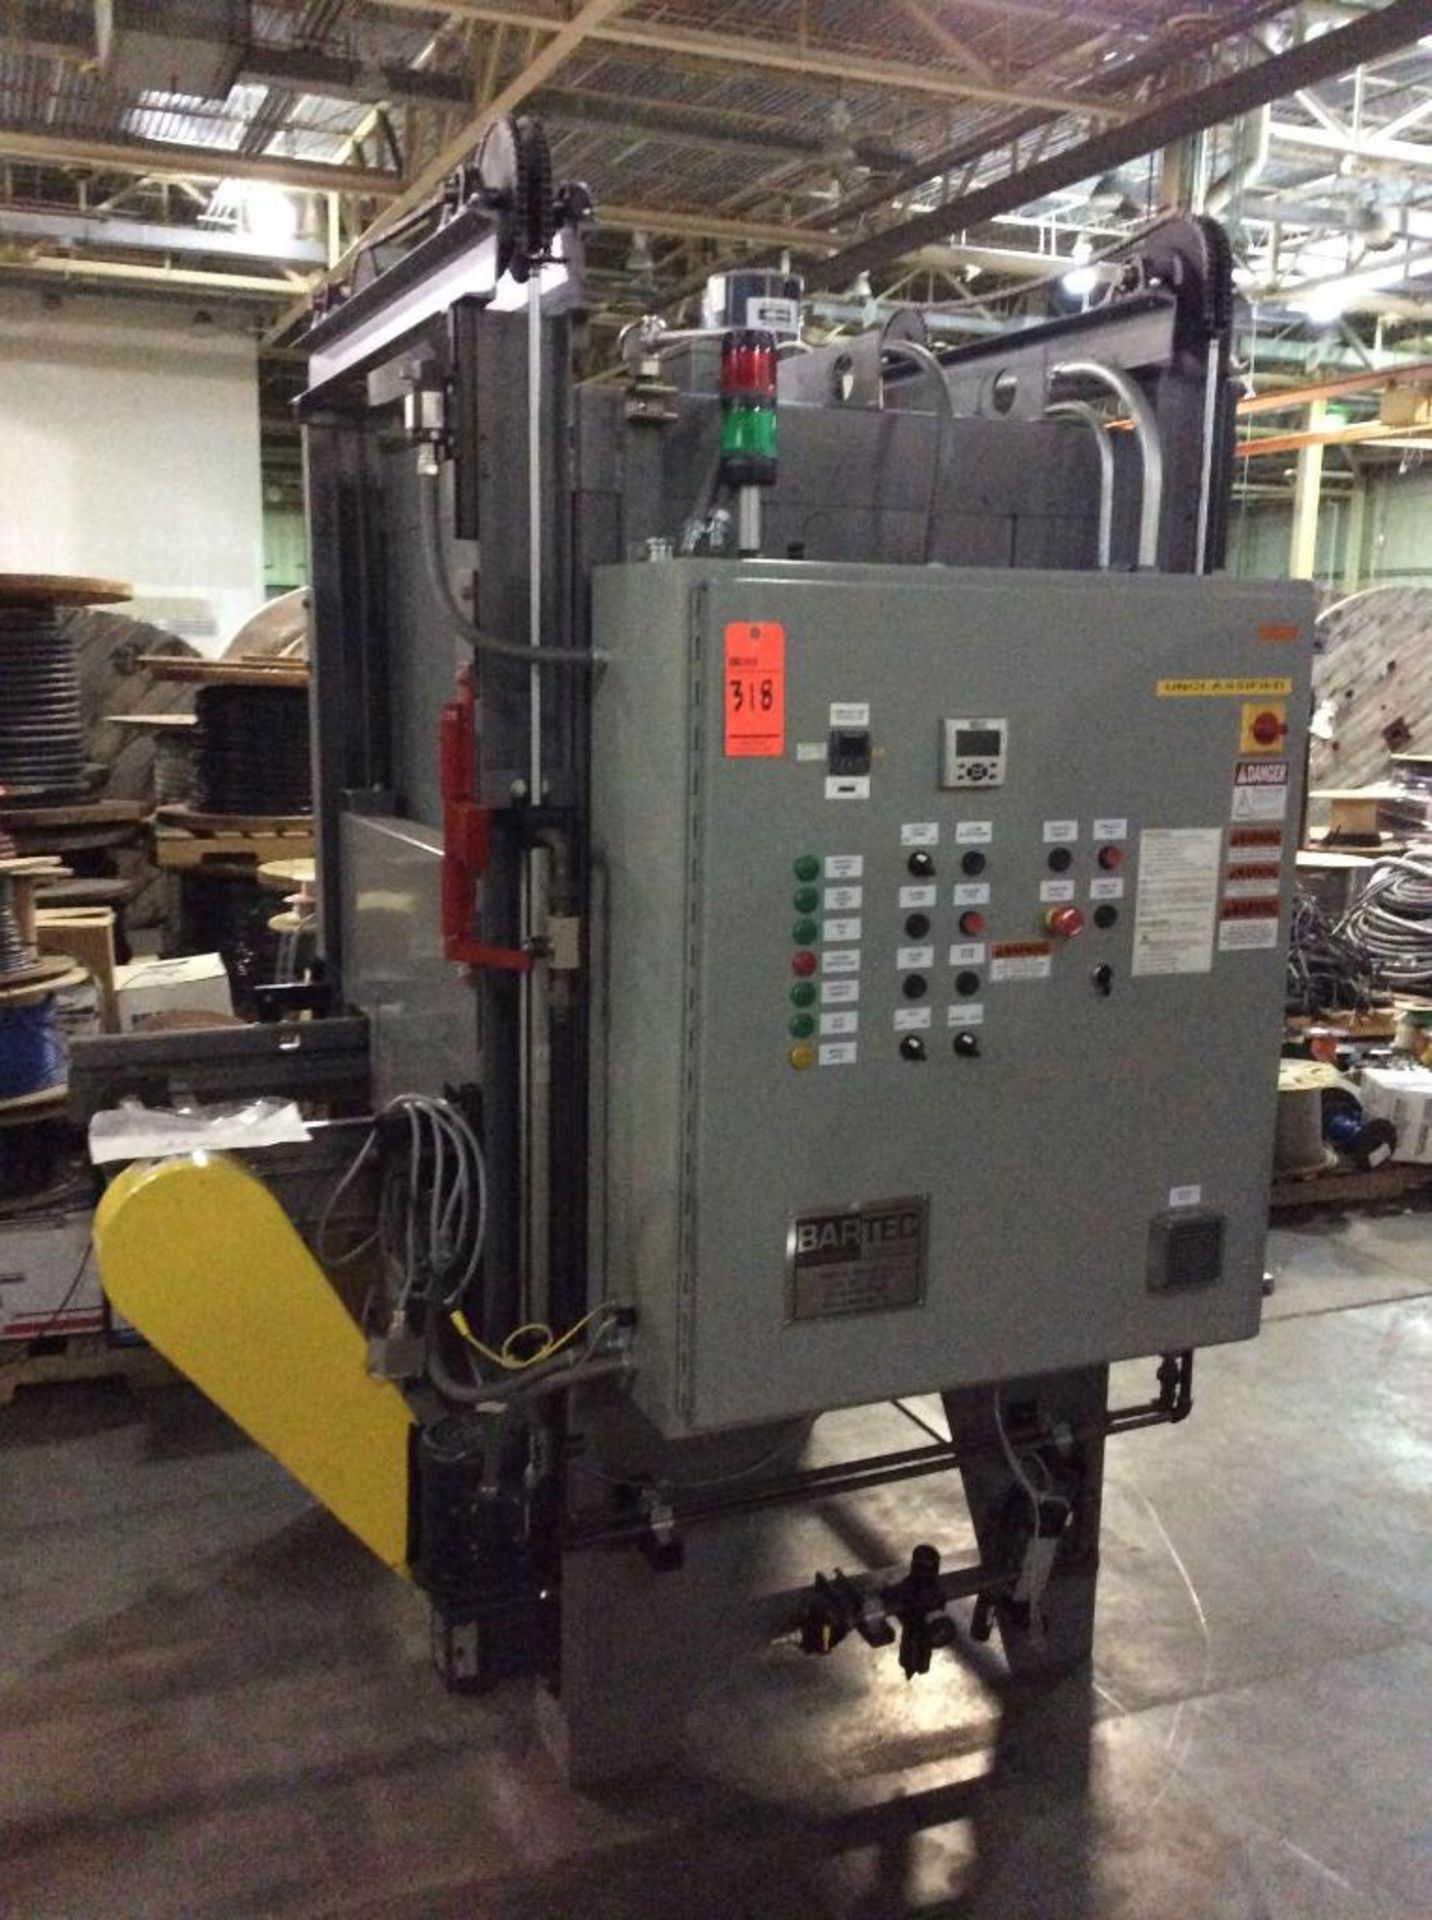 Bartec potting line consisting of Bartec oven, approx 6' x 6' x 7' high flow thru style mn TOPFLOW/